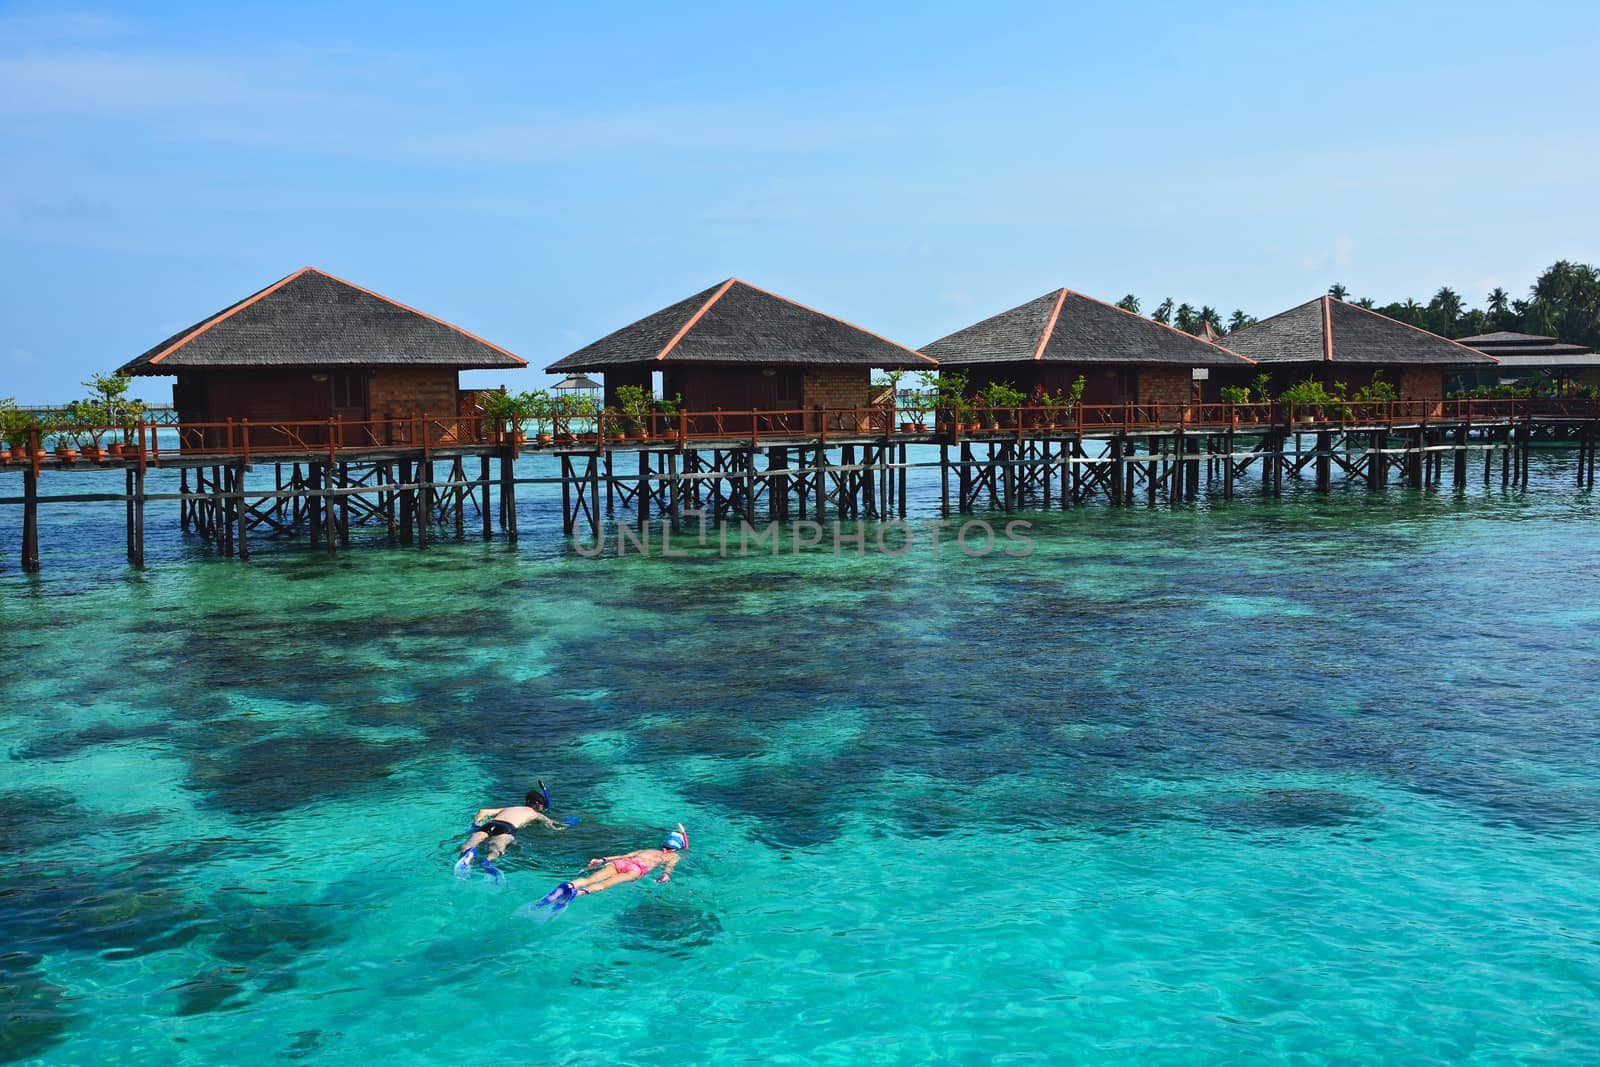 Snorkeling tourist Living in the ocean at Mabul island, Malaysia by think4photop